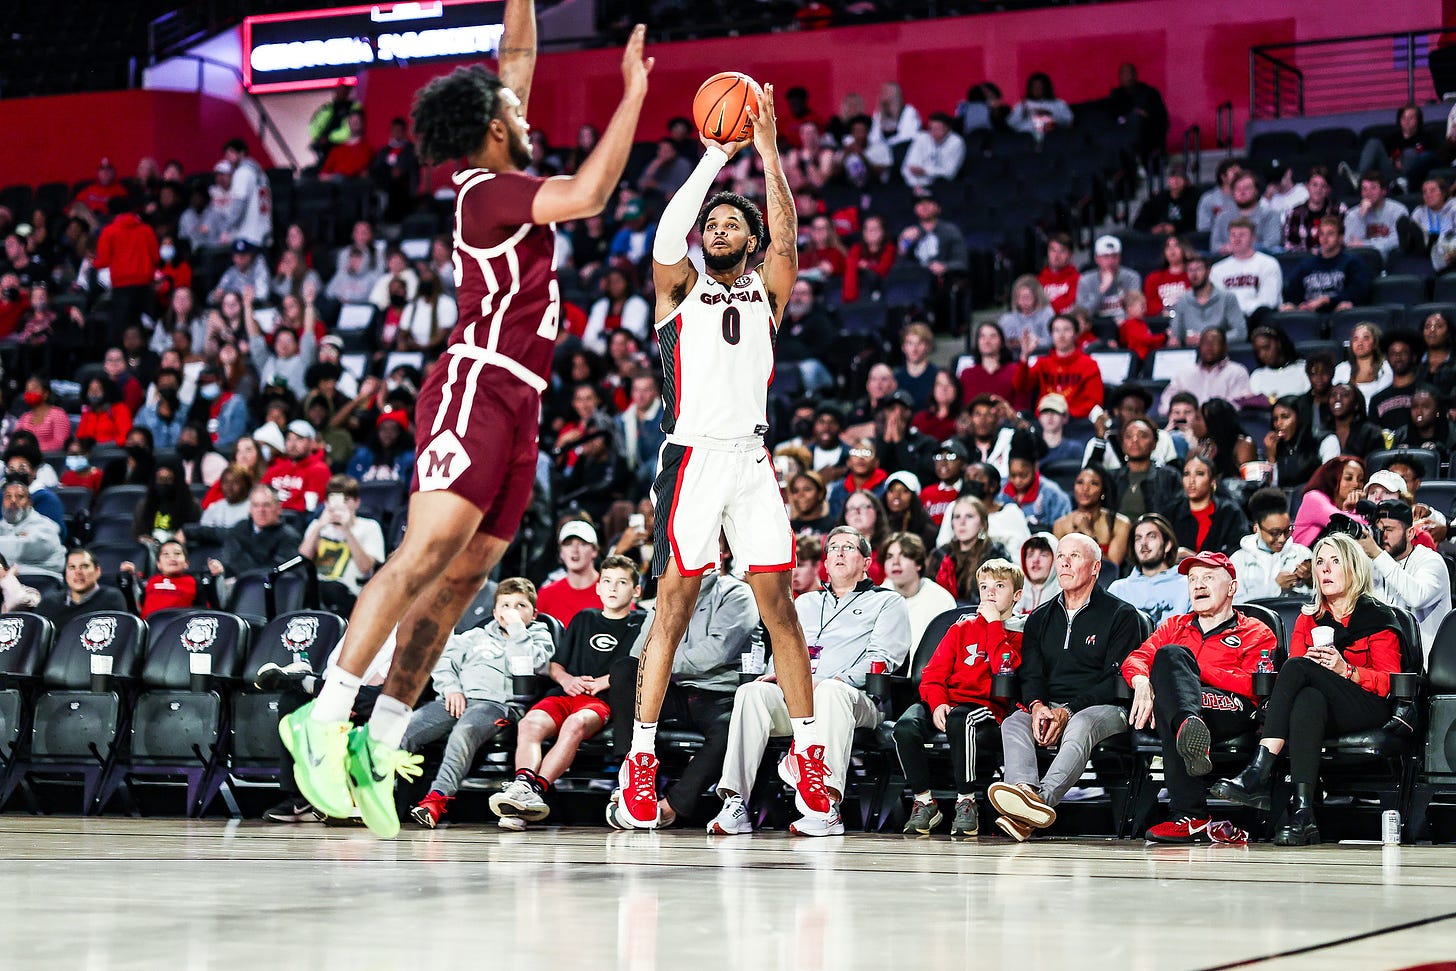 Georgia during an exhibition against Morehouse at Stegeman Coliseum in Athens, Ga., on Friday, Nov. 3, 2021. (Photo by Tony Walsh)